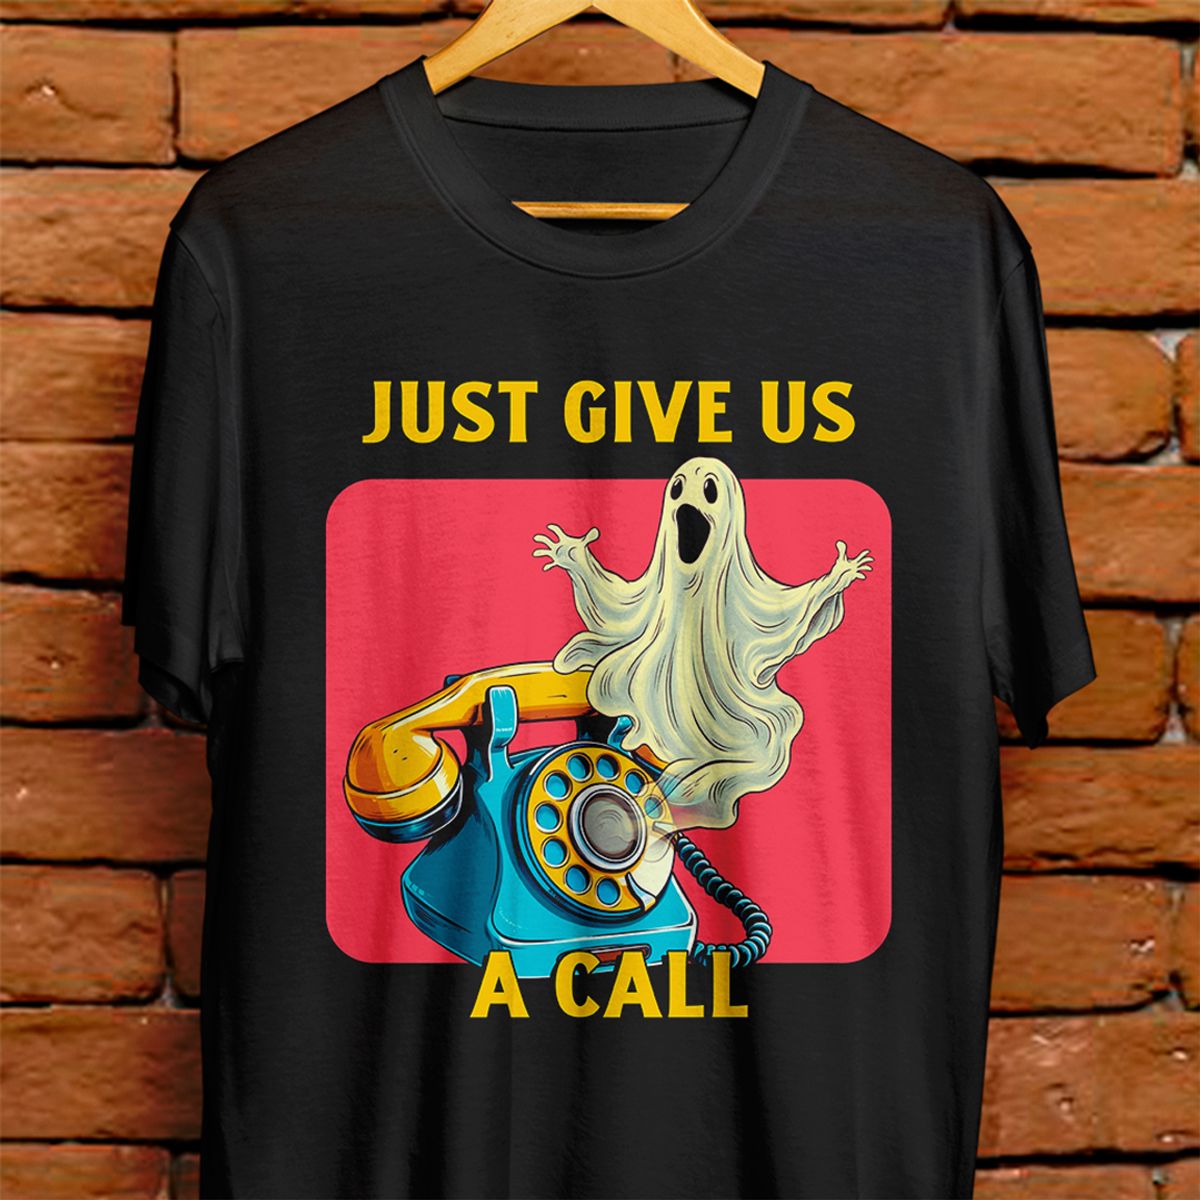 Nome do produto: Camiseta Unissex - Just give us a call